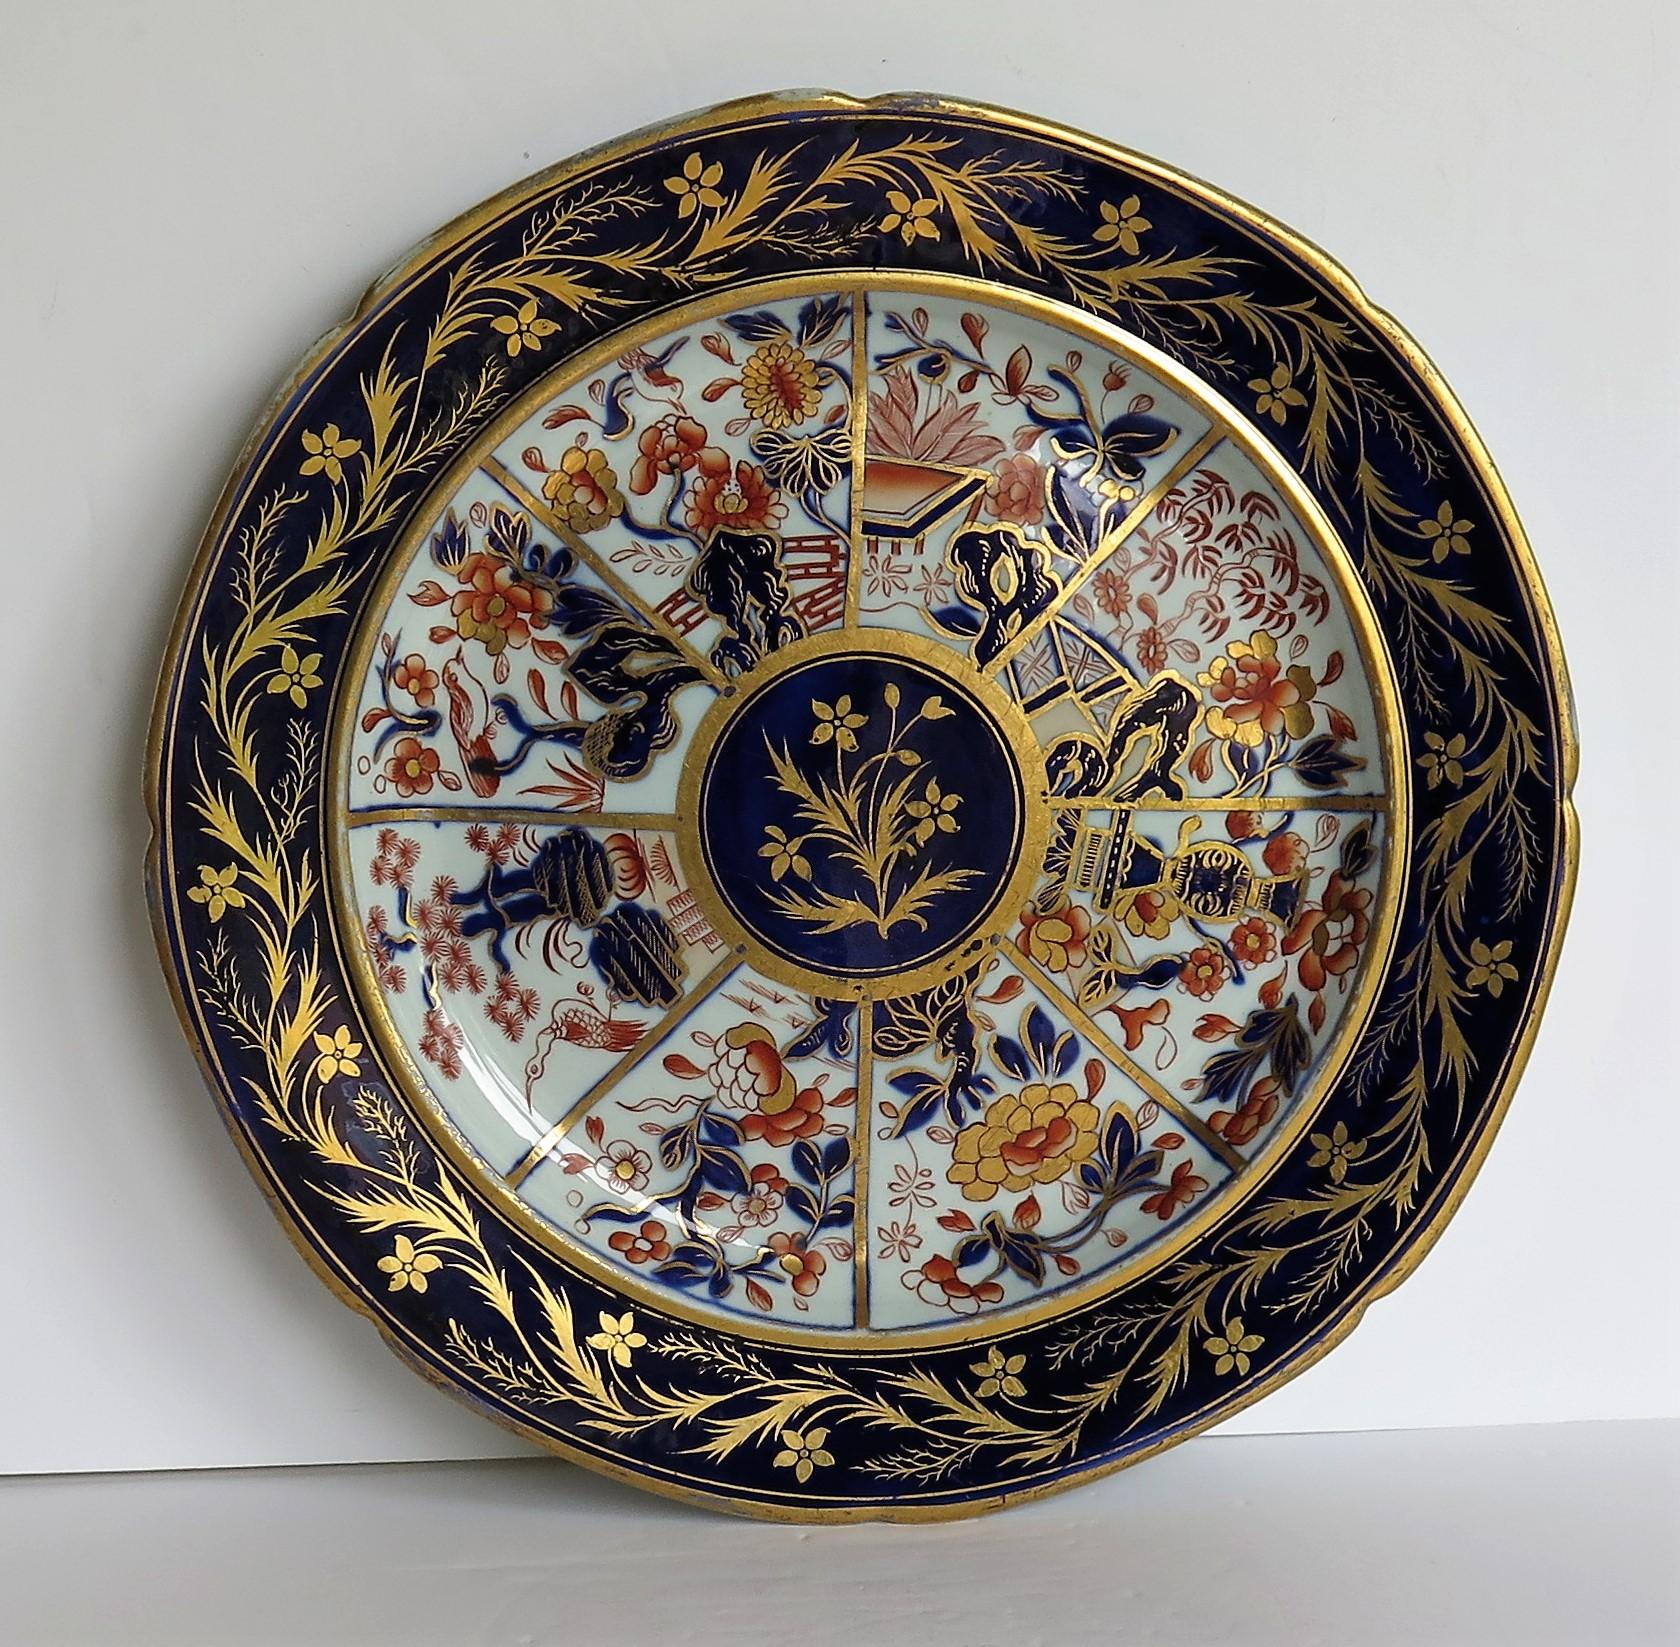 This is a very fine and rare dinner plate made by the Mason's factory at Lane Delph, Staffordshire, England, beautifully hand decorated in the Radial Japan Mazarine Pattern, fully stamped and dating to the earliest period of Mason's Ironstone